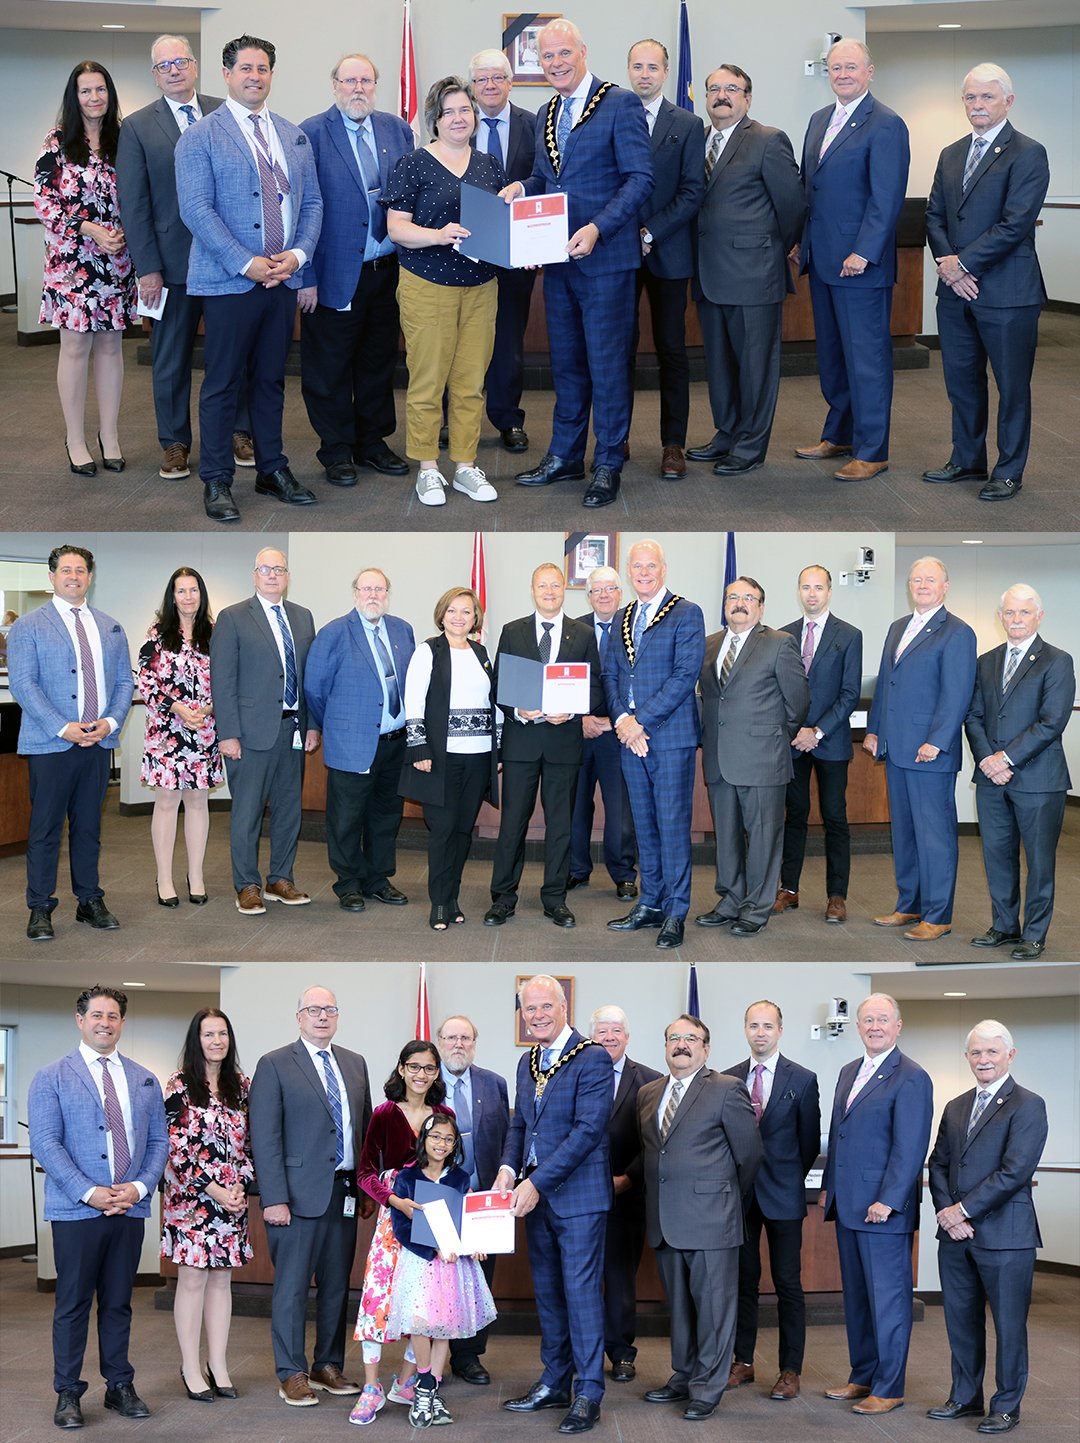 Members of Oshawa City Council presented the Oshawa Culture Counts Awards to this year’s recipients at the June 26 City Council meeting.